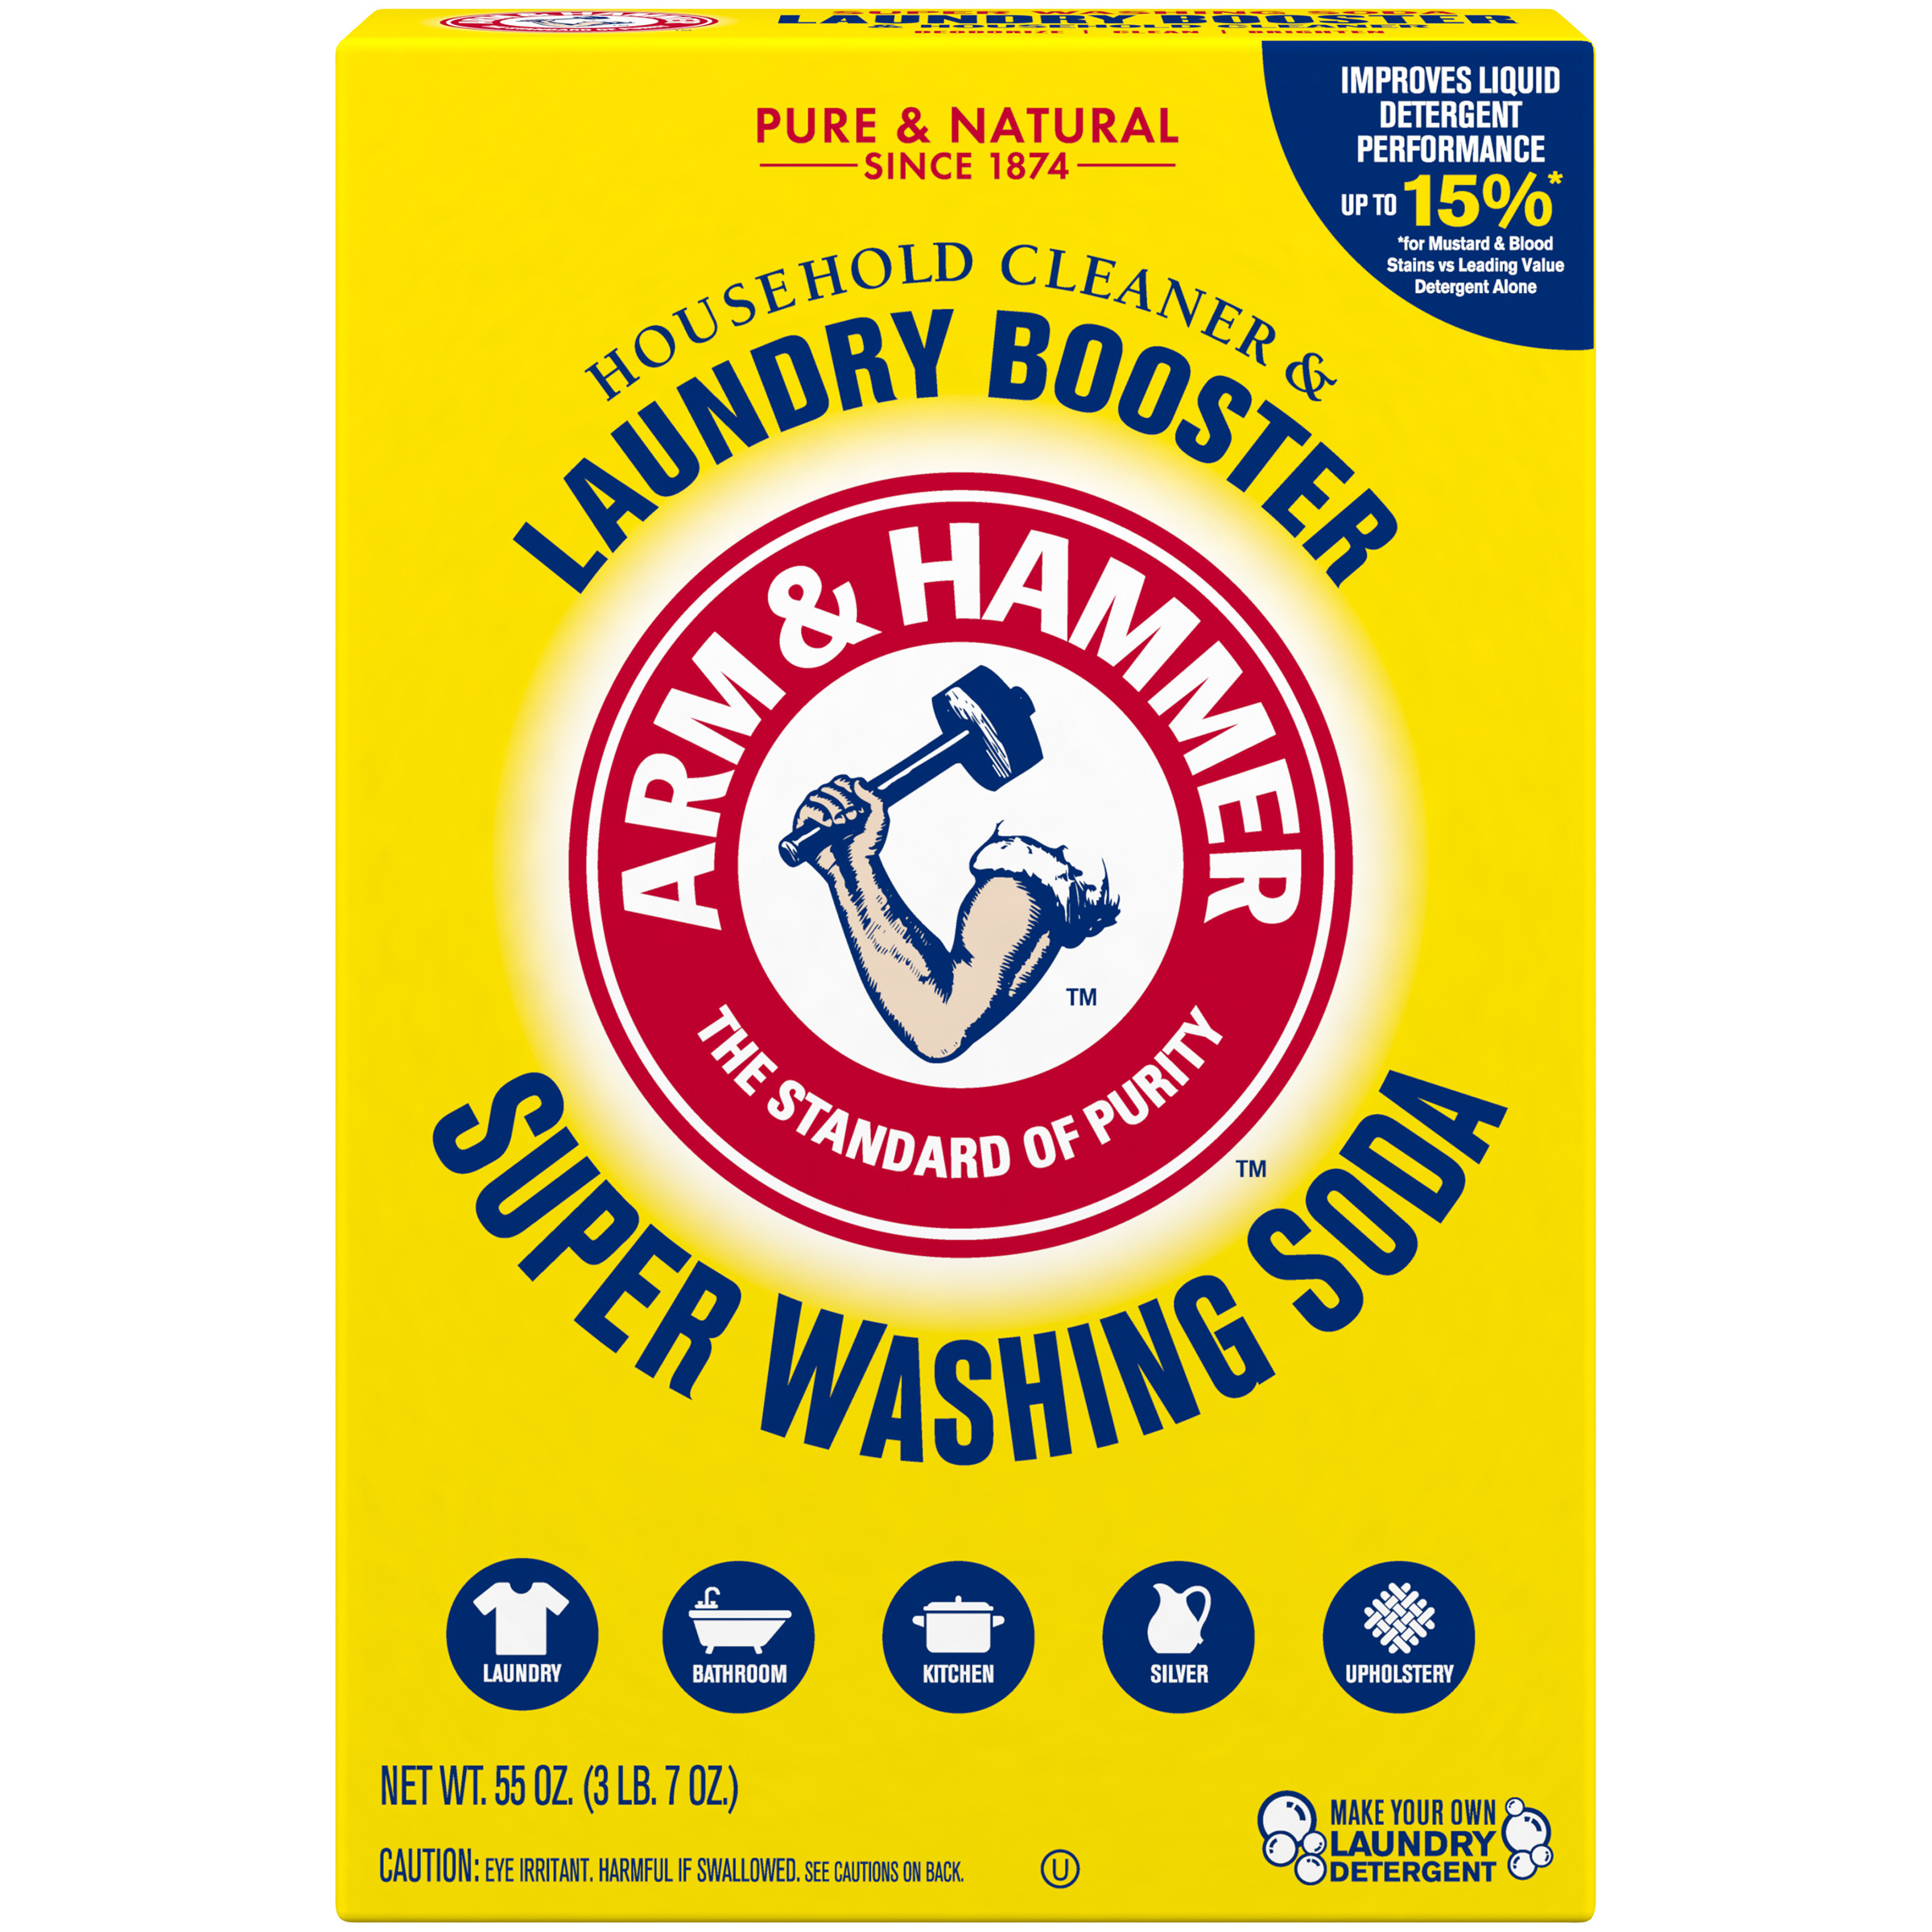 ARM & HAMMER Super Washing Soda Laundry Booster and Household All Purpose Cleaner Powder, 55 oz Box - image 1 of 13